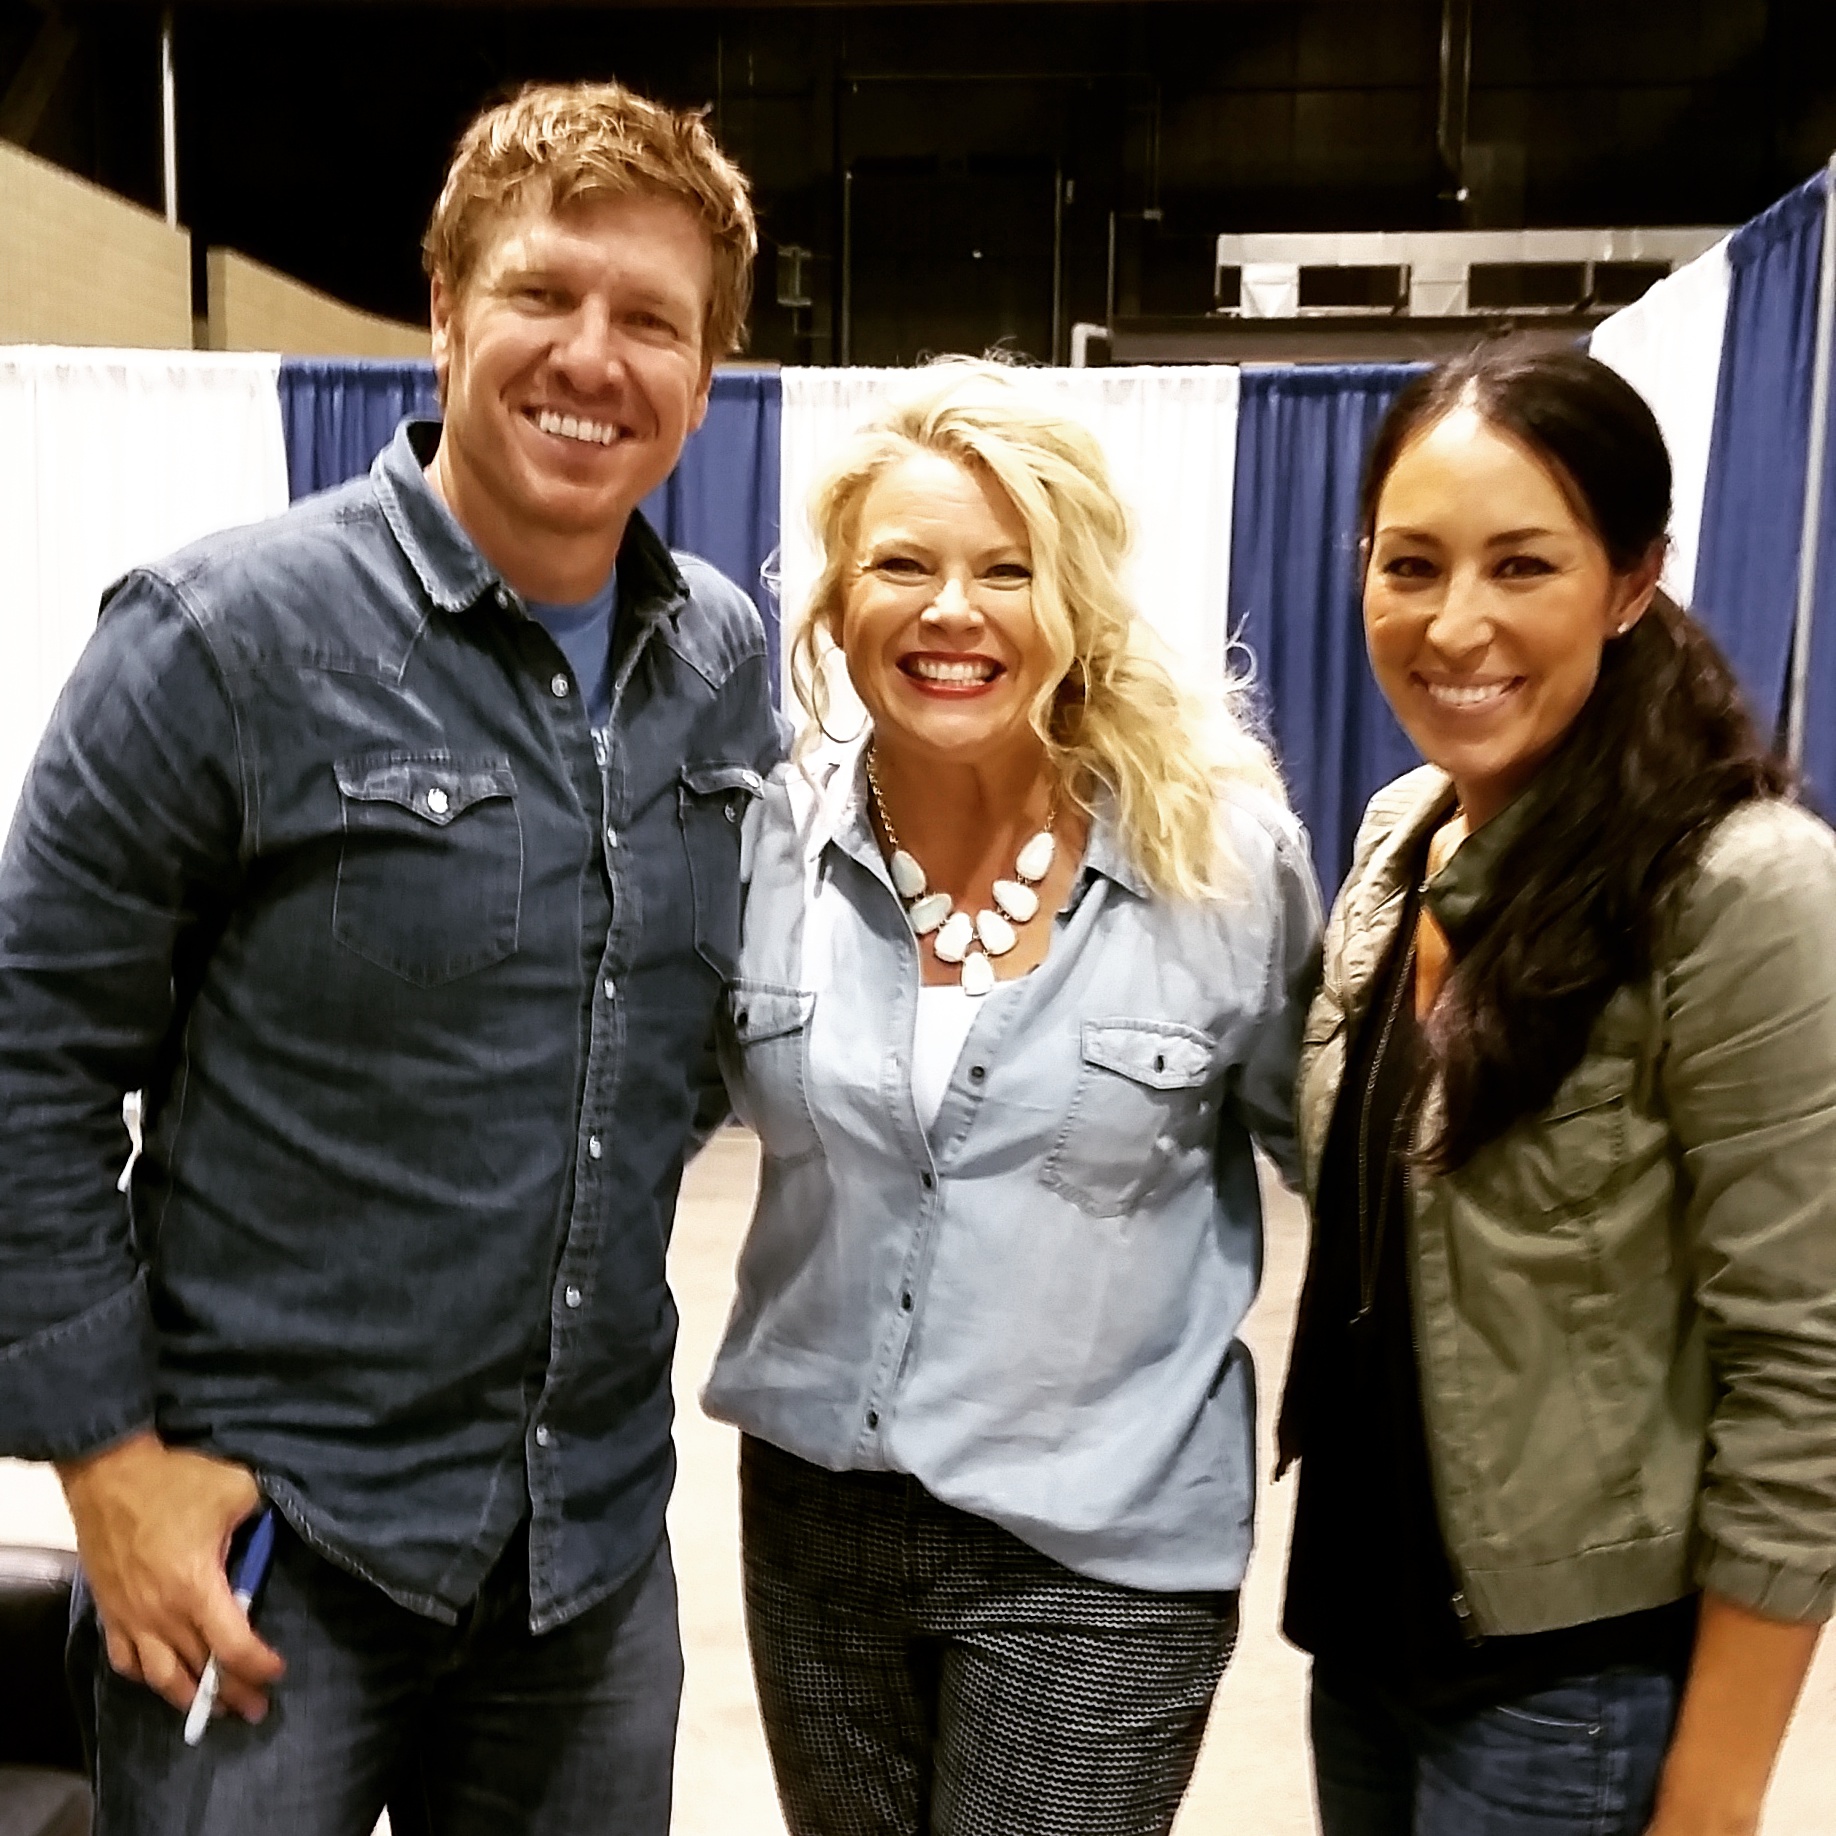 Home Show: Chip & Jo. The Treehouse Master. And I. Oh my!